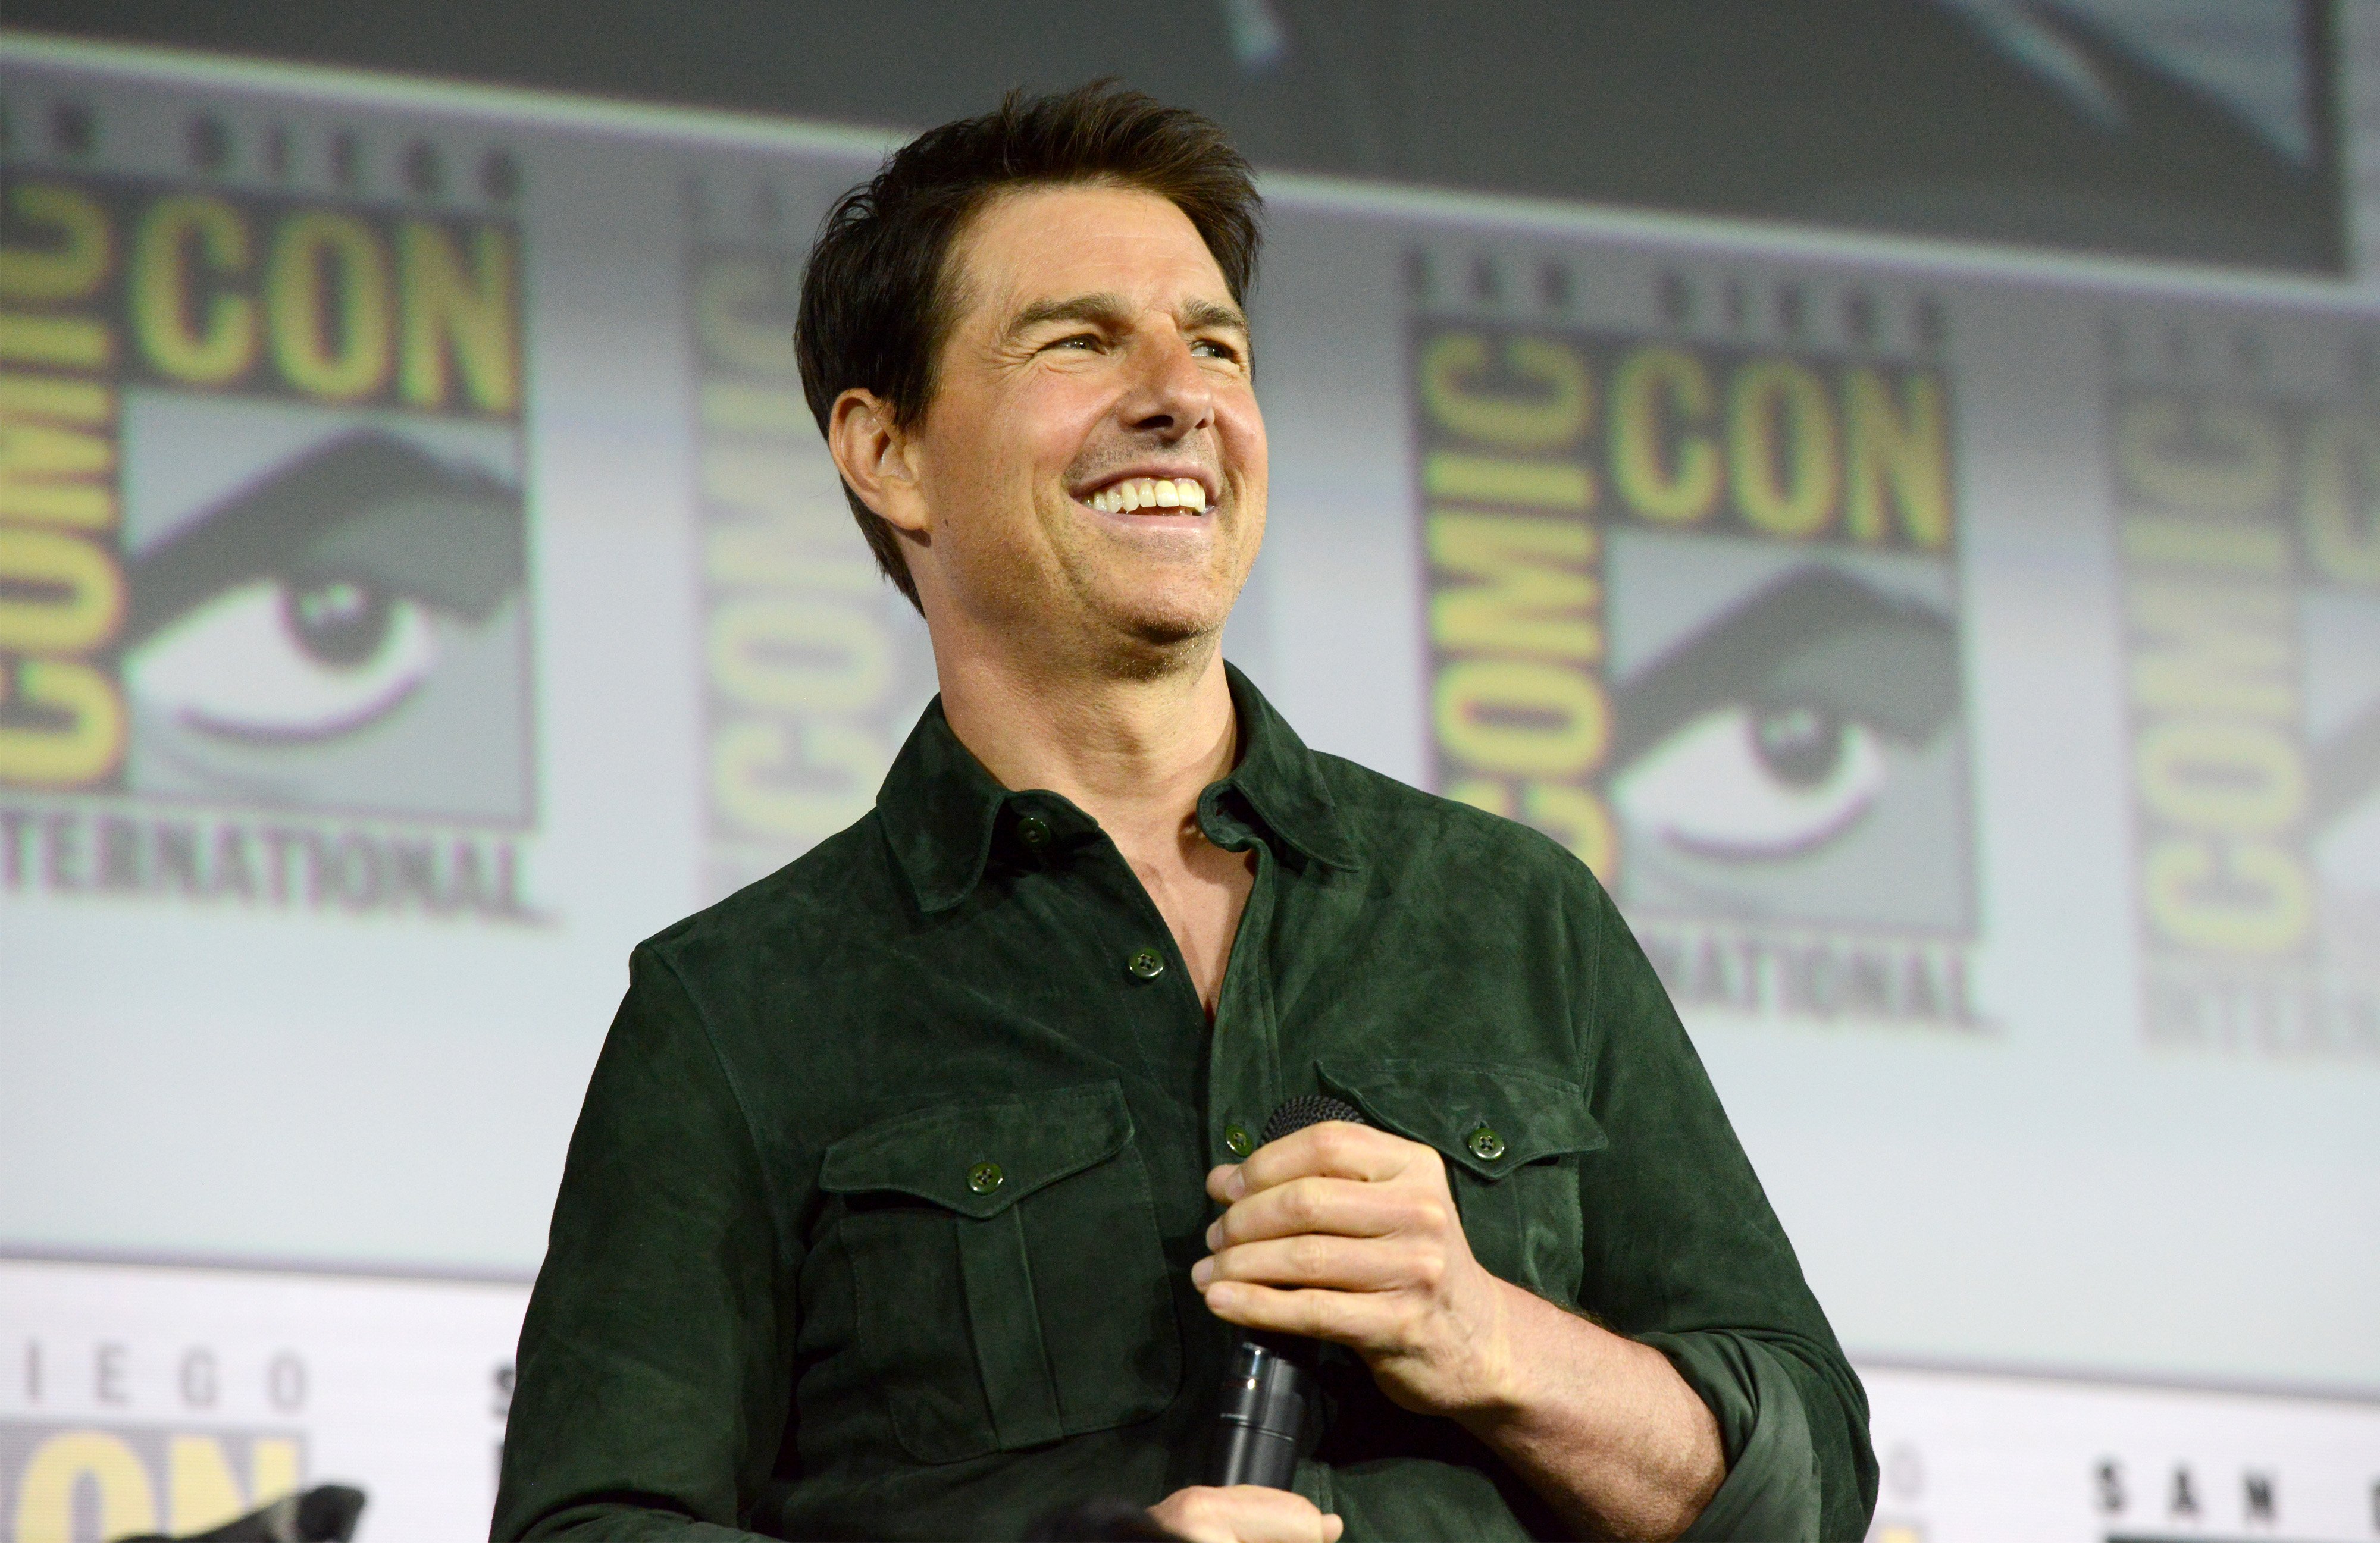 Tom Cruise at Comic-Con in 2020